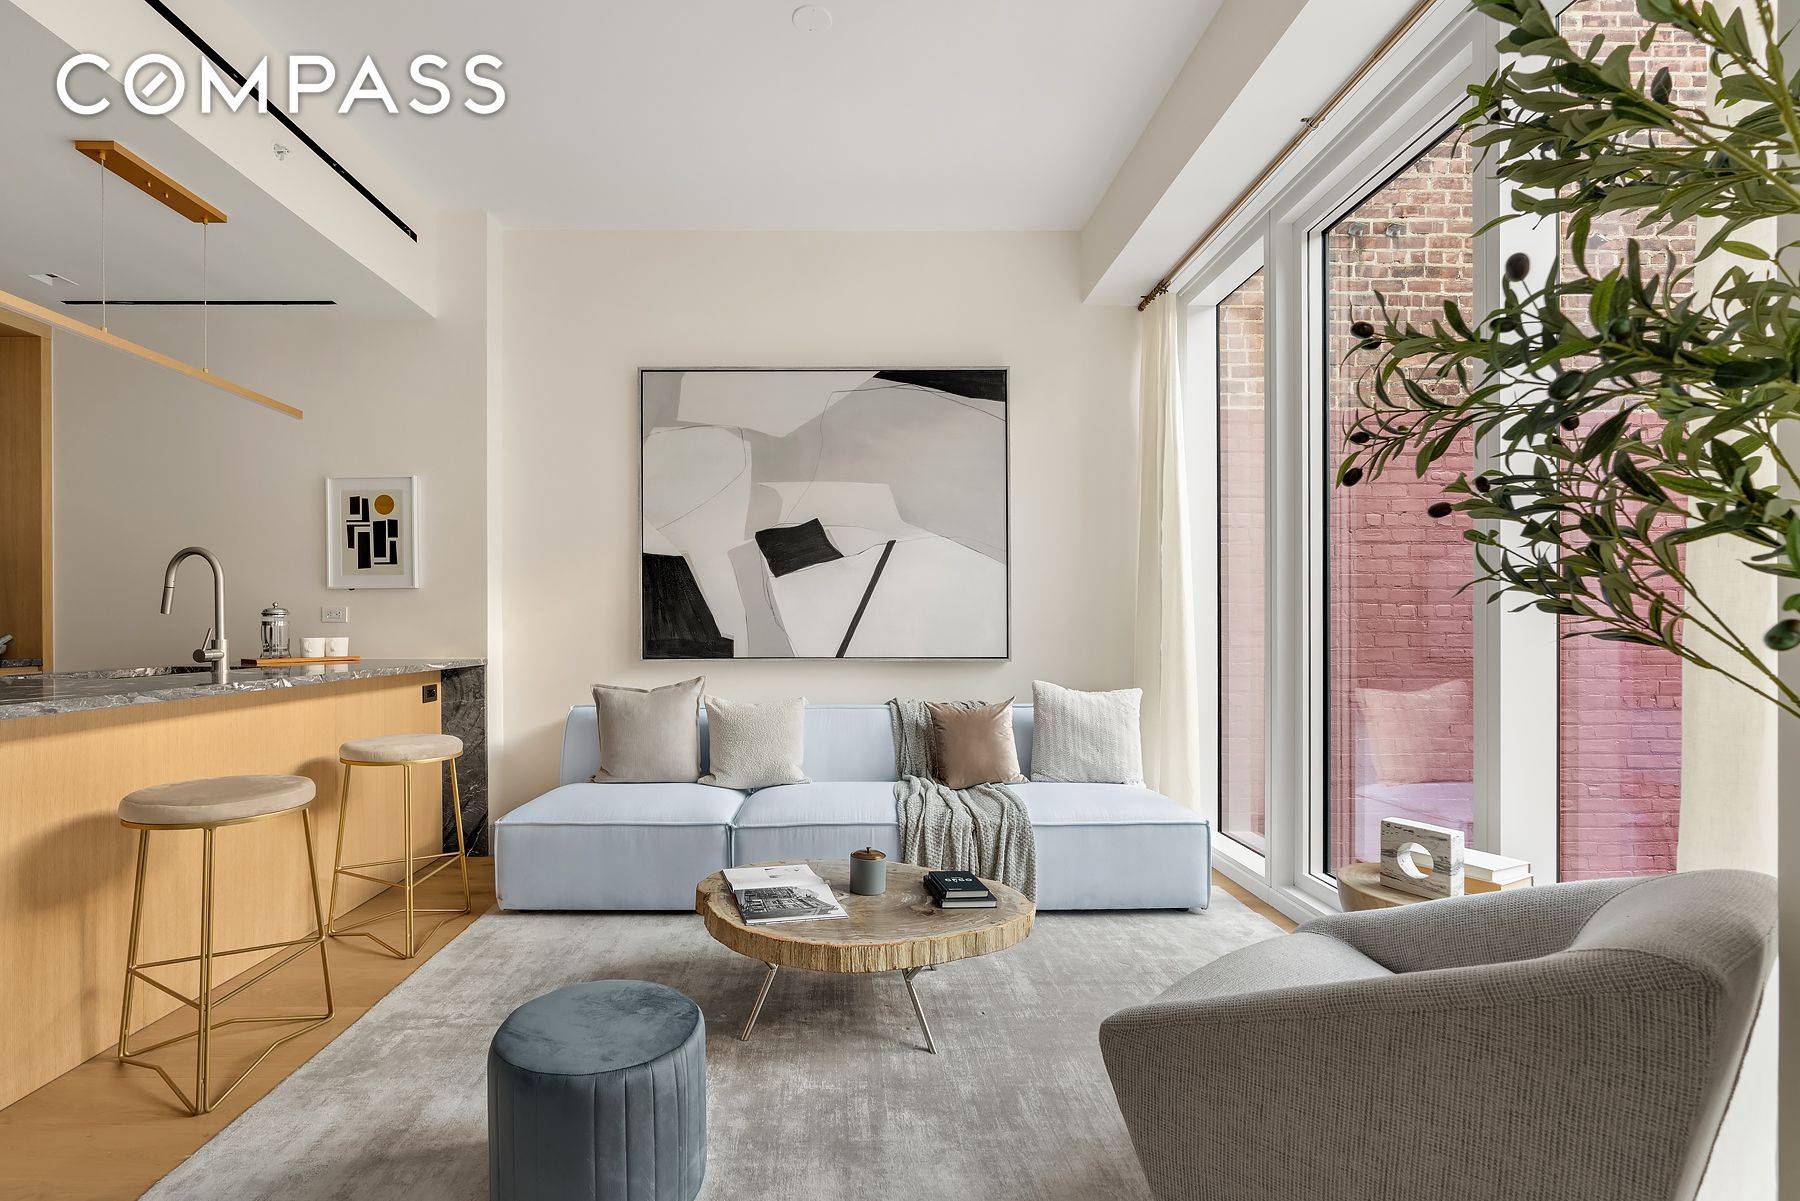 IMMEDIATE OCCUPANCY. Experience the elegance of this masterfully crafted one bedroom, one bathroom luxury home at the stunning new development, 101 West 14th Street !